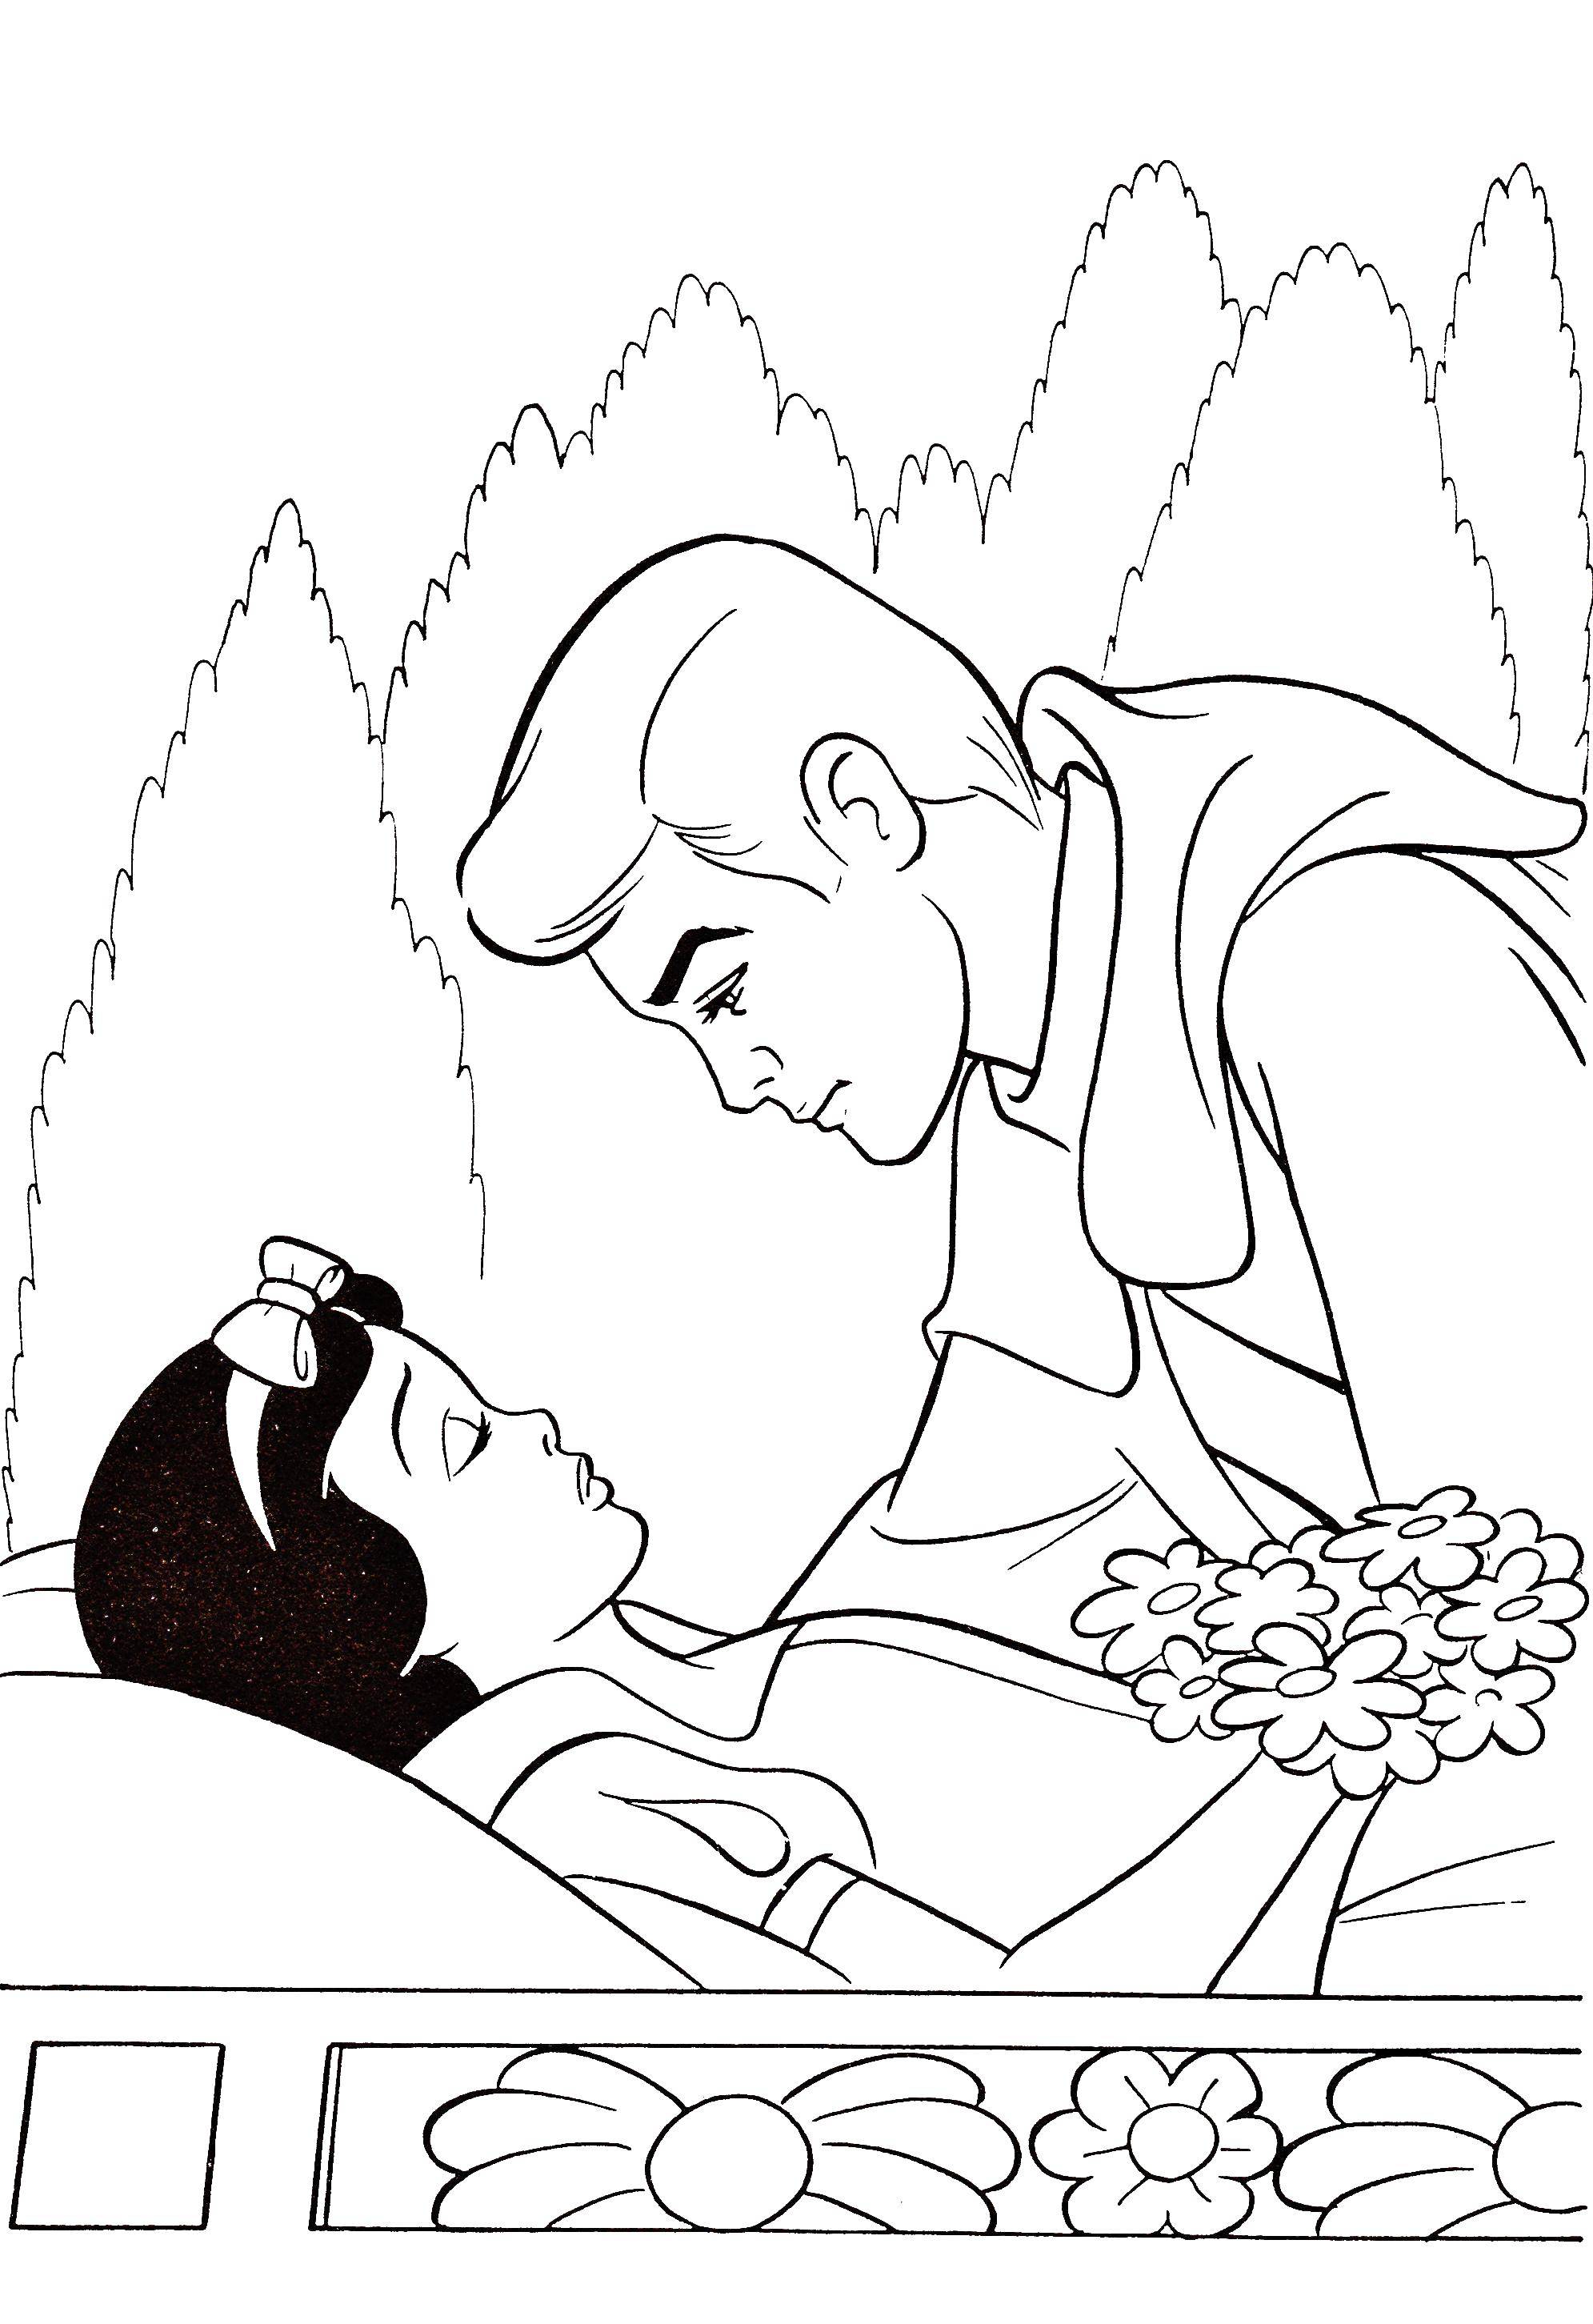 Coloring Snow white and the Prince. Category Princess. Tags:  princesses, cartoons, fairy tales, Snow white, the Prince.